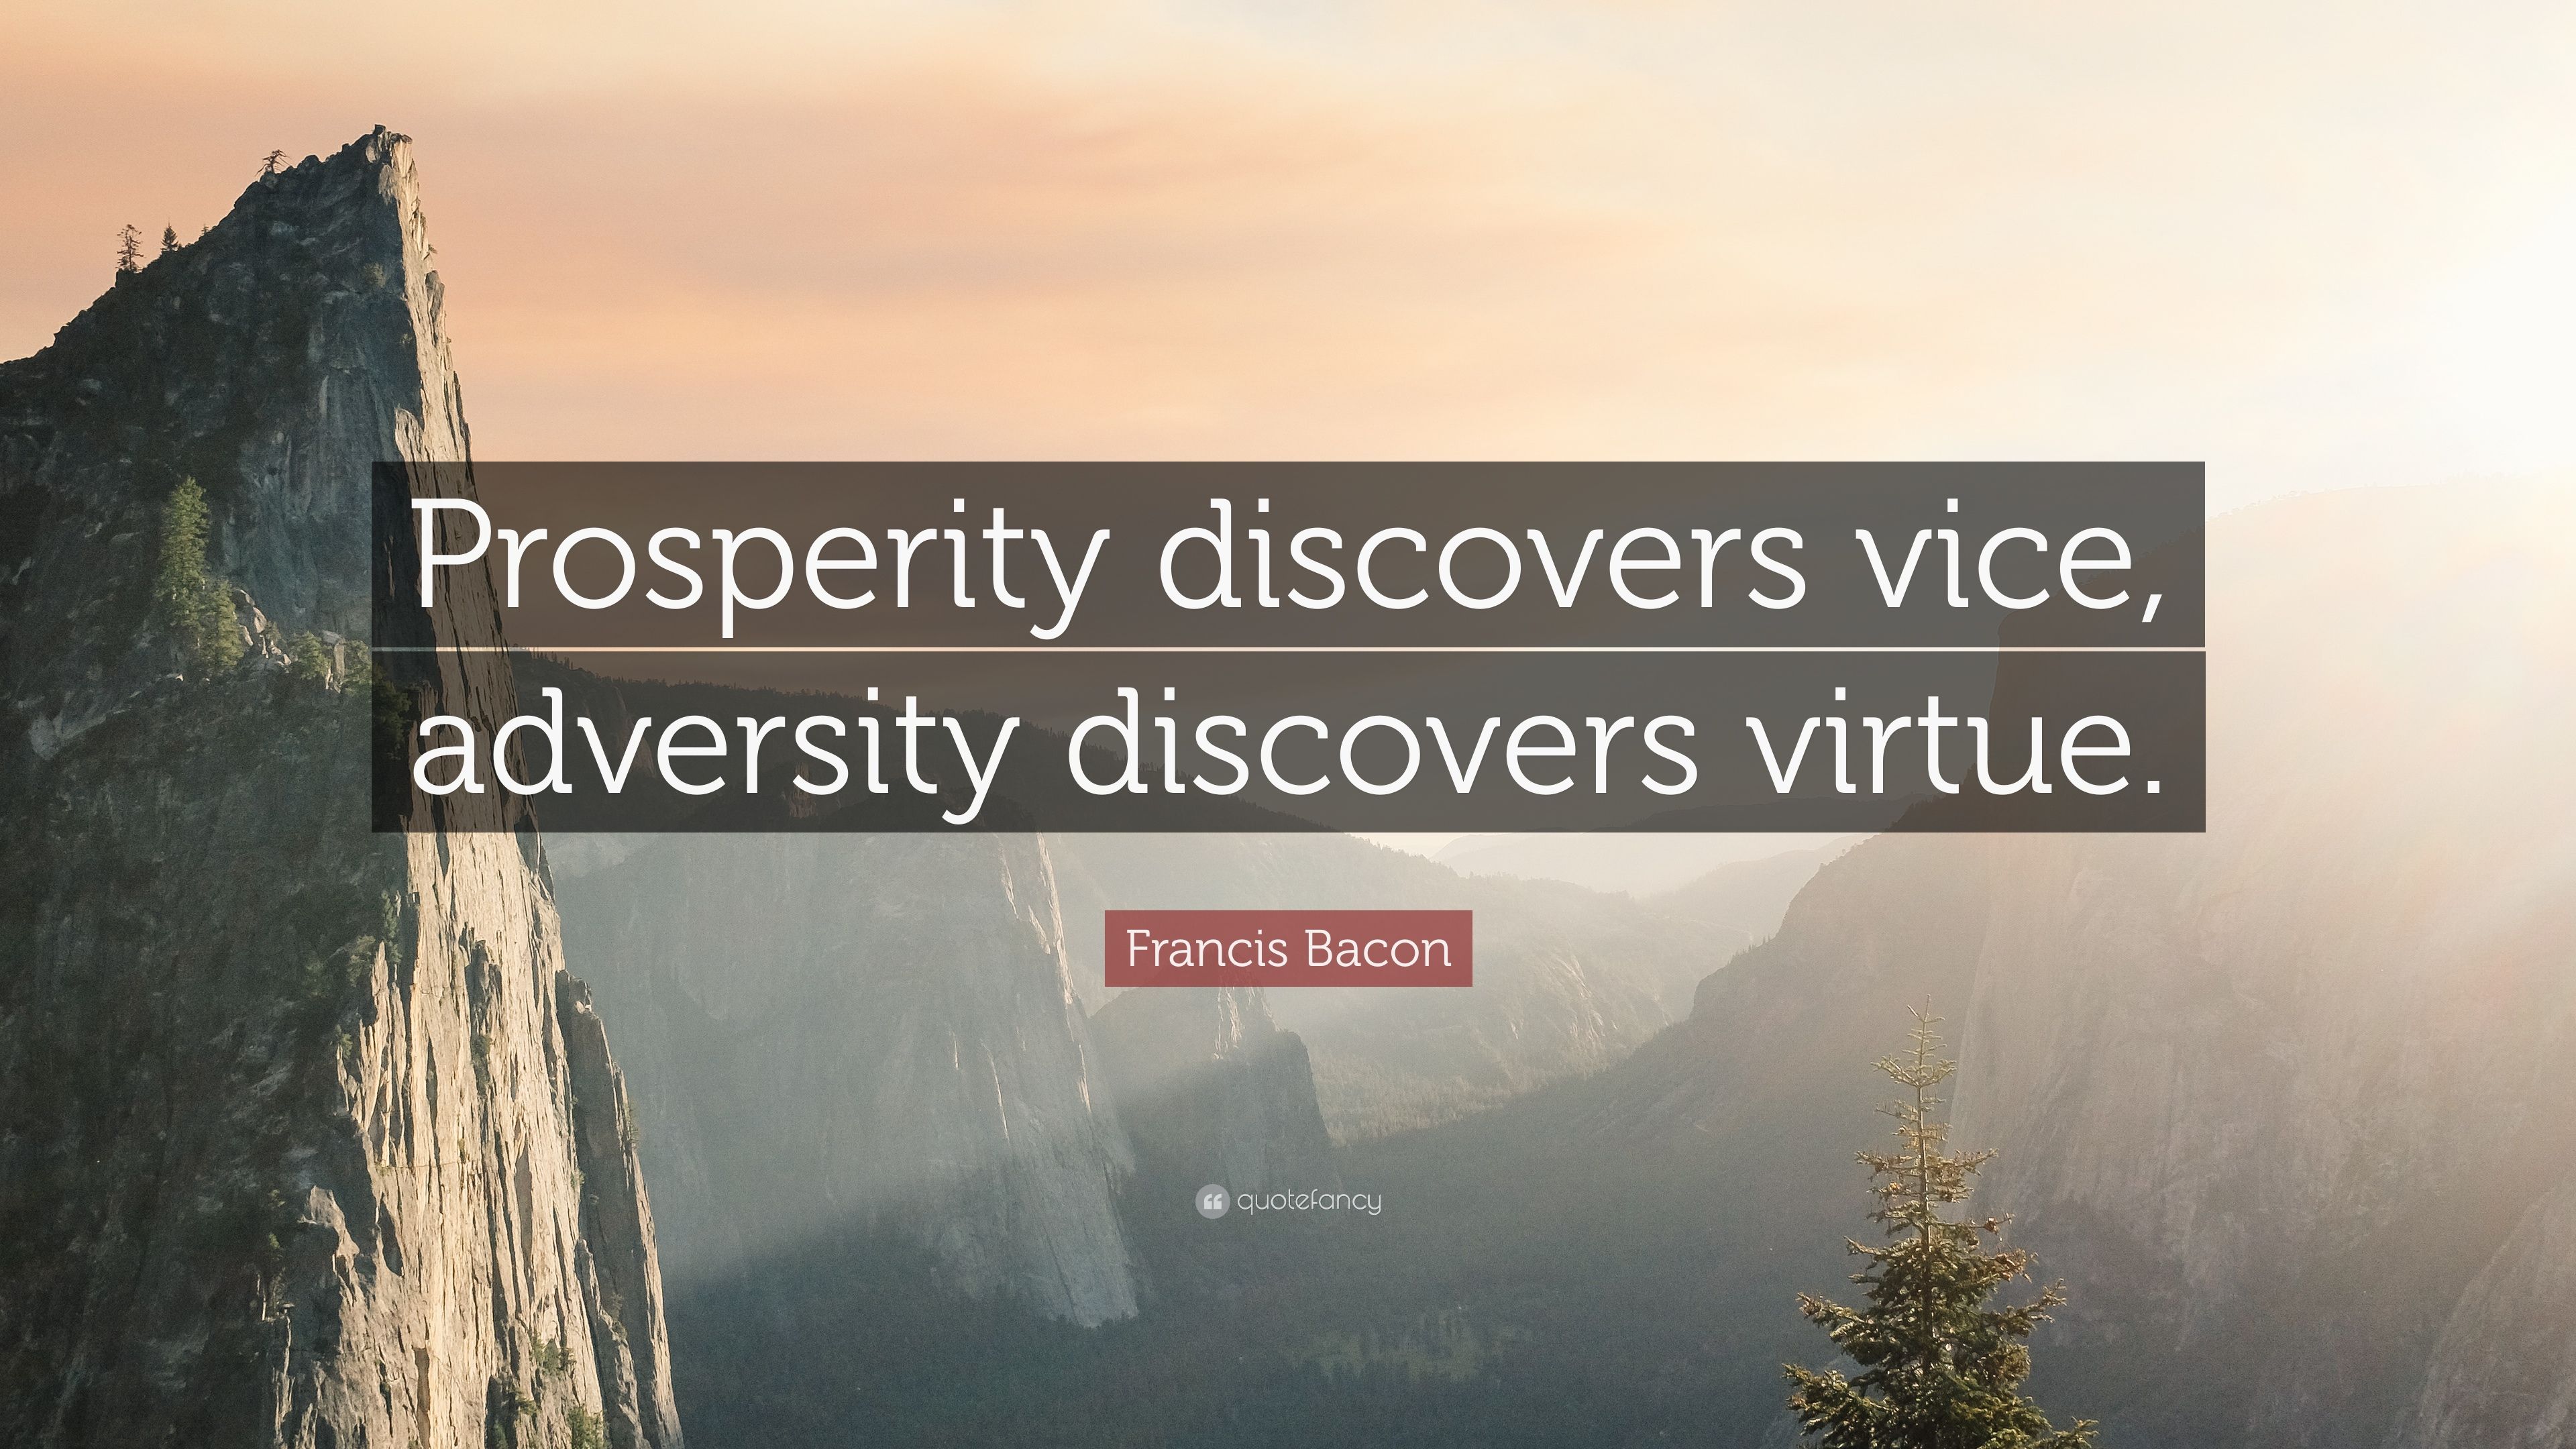 Francis Bacon Quote: “Prosperity discovers vice, adversity